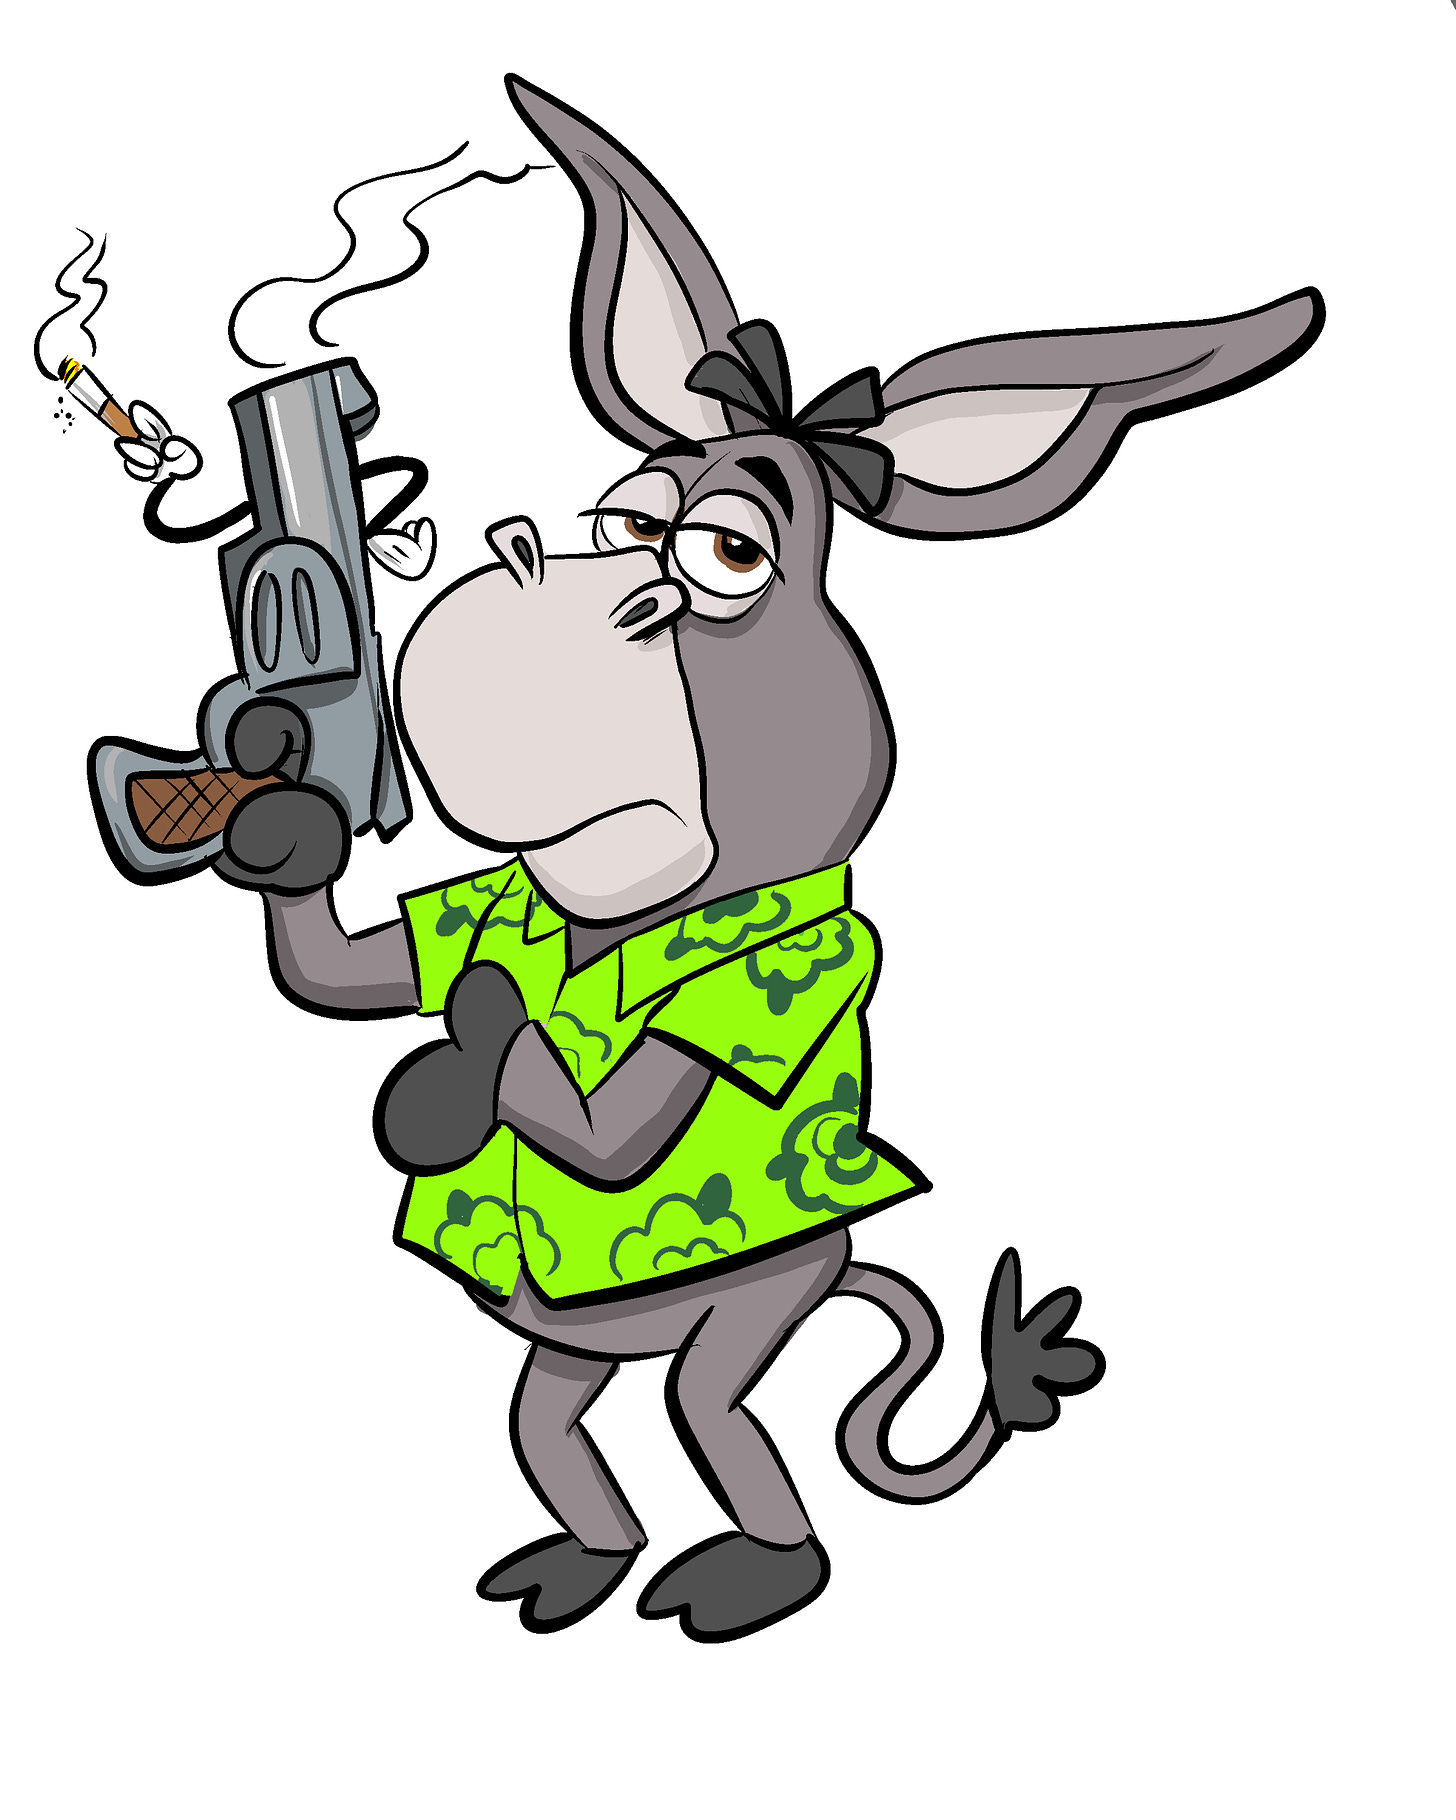 Illustration of Hoté the Jackass Letters mascot holding a gun that is smoking a cigarette.